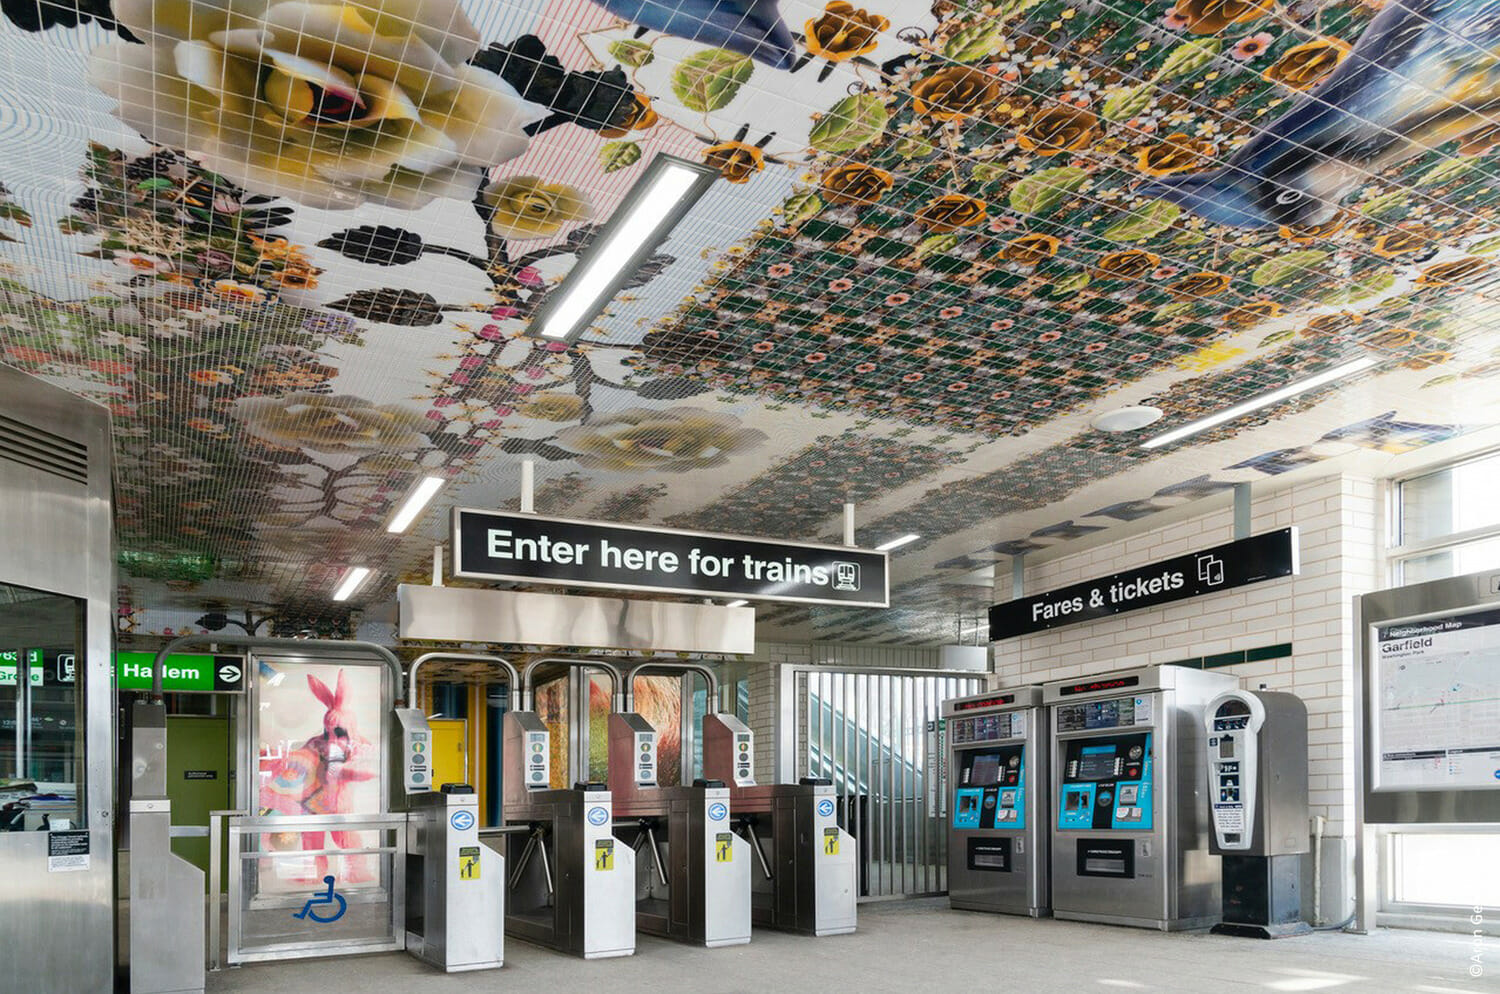 A subway station with a mural on the ceiling.